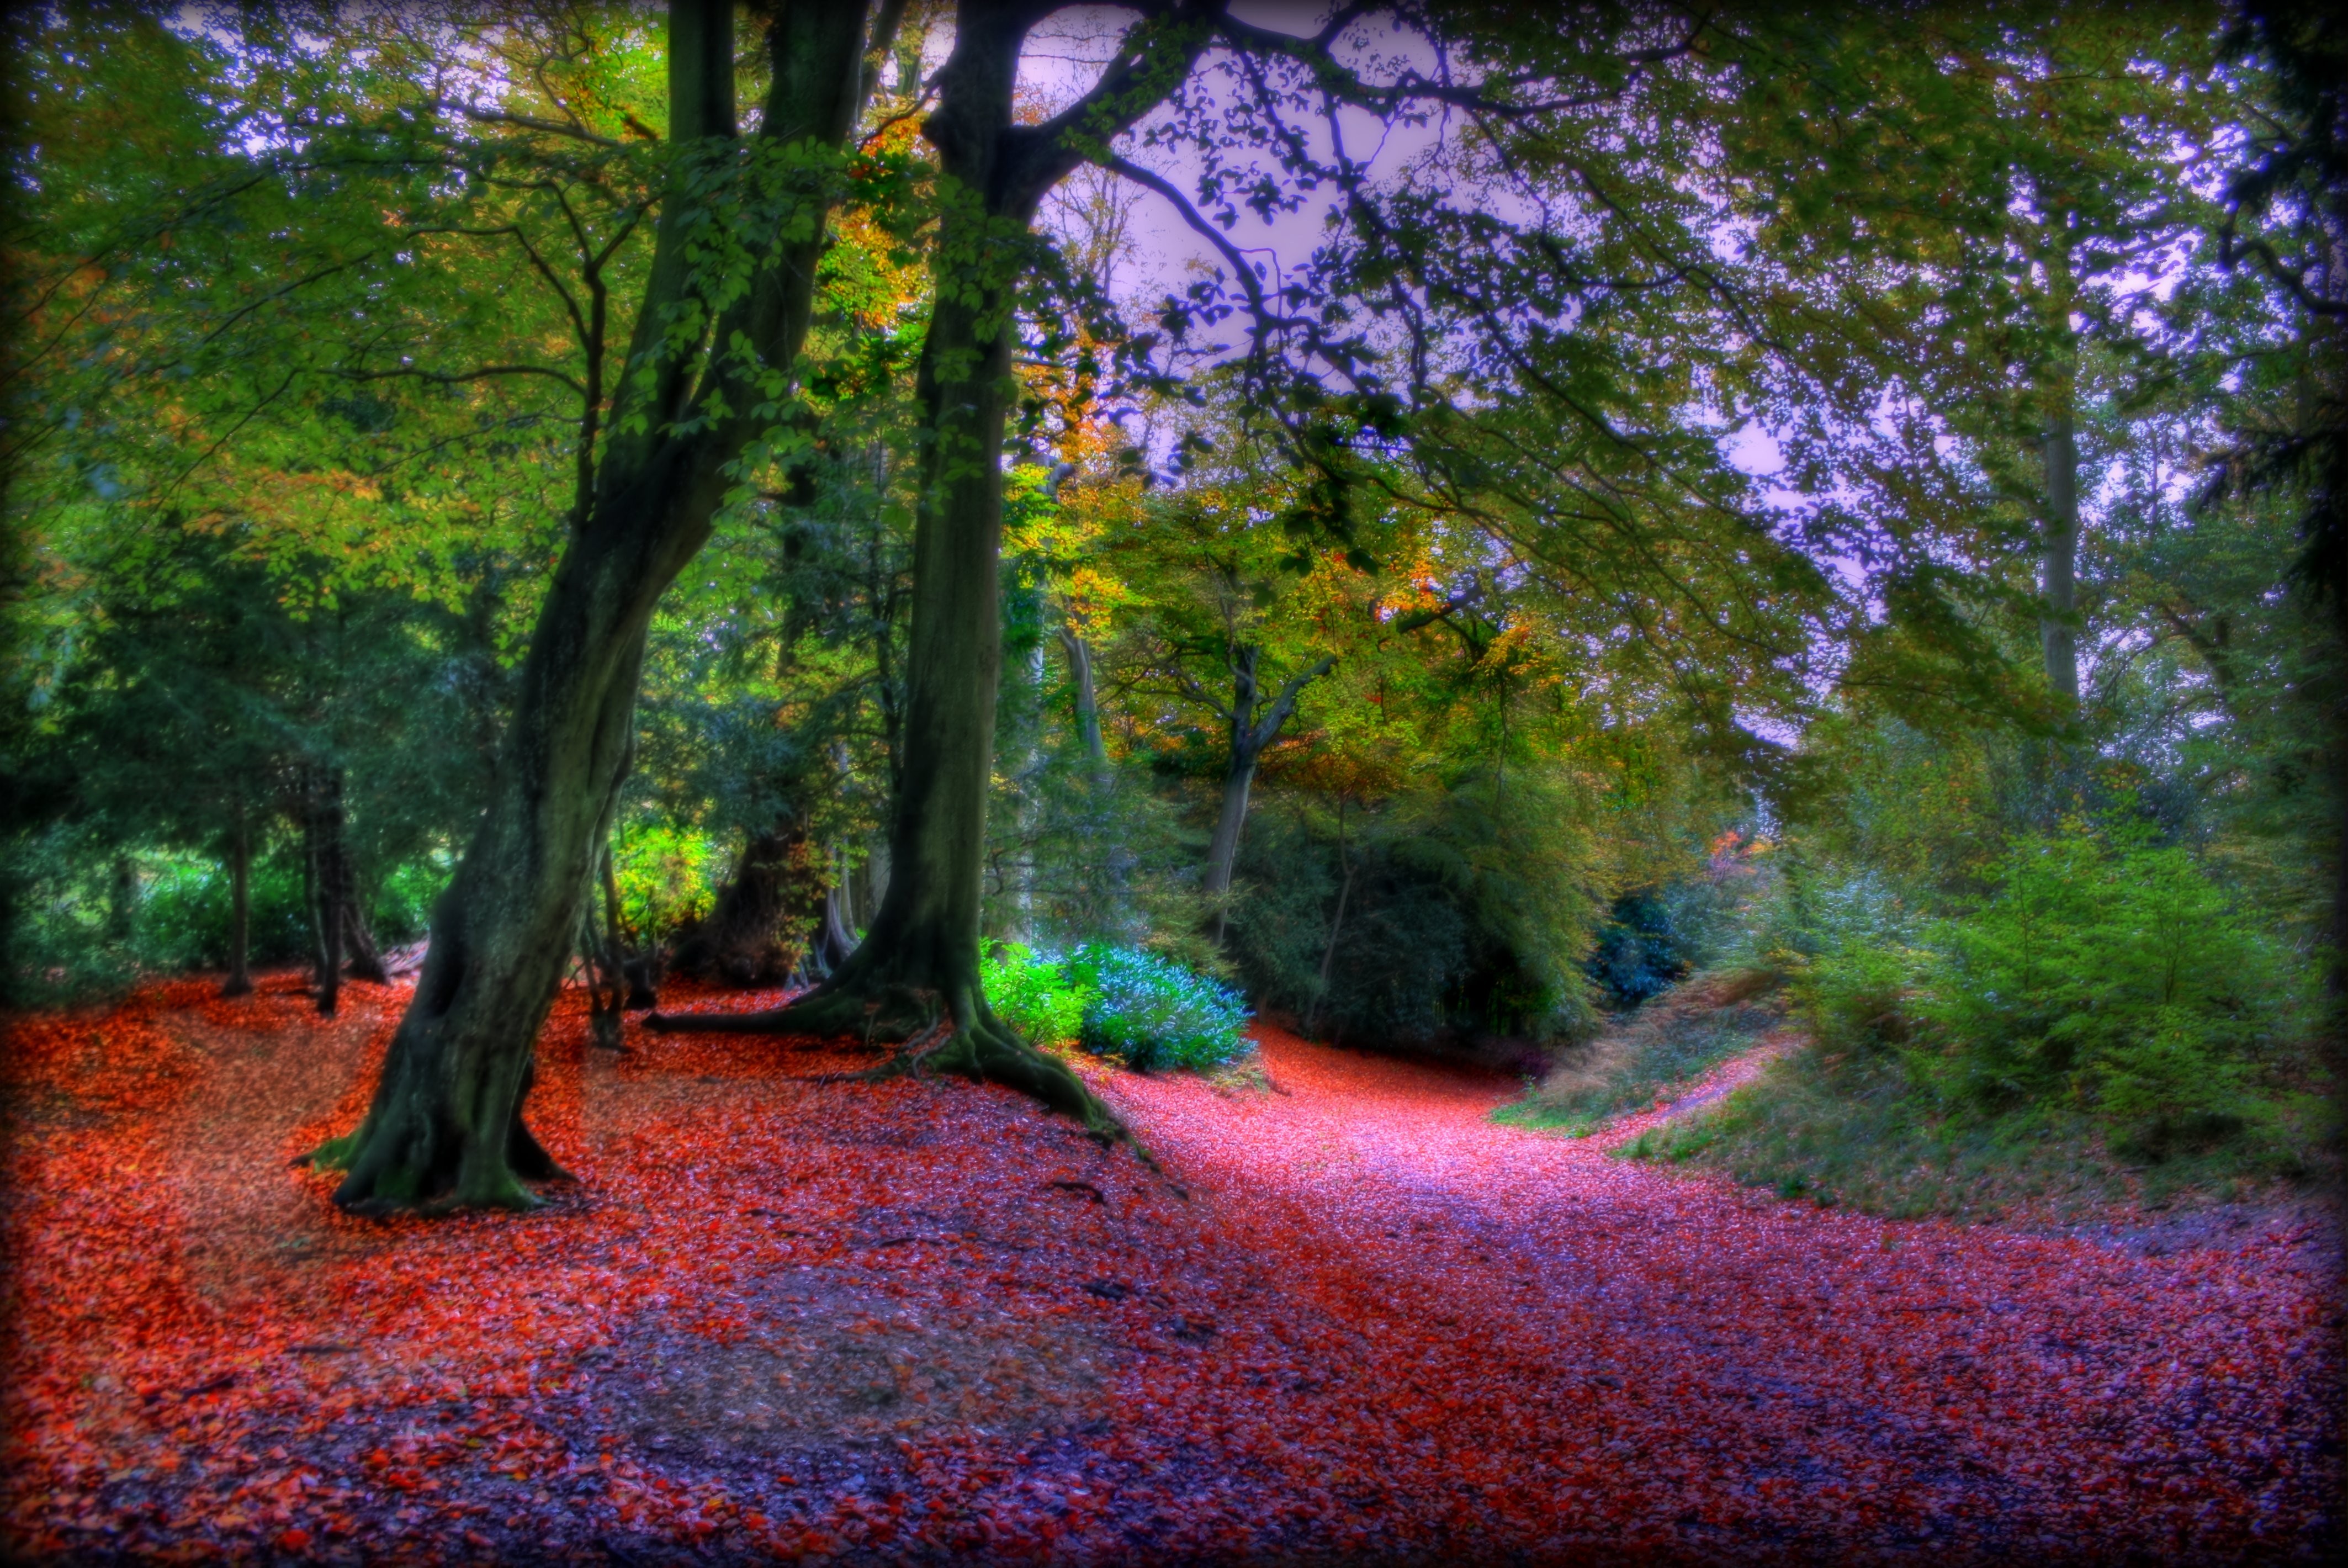 Great Walk Pretty Beautiful Season Leaves Google image from http://xinature.com/great-walk-pretty-beautiful-season-leaves-nice-cool-beauty-forest-park-colors-trees-photography-nature-amazing-scenery-landscape-autumn-view-lovely-hd-live-wallpaper-for-pc/